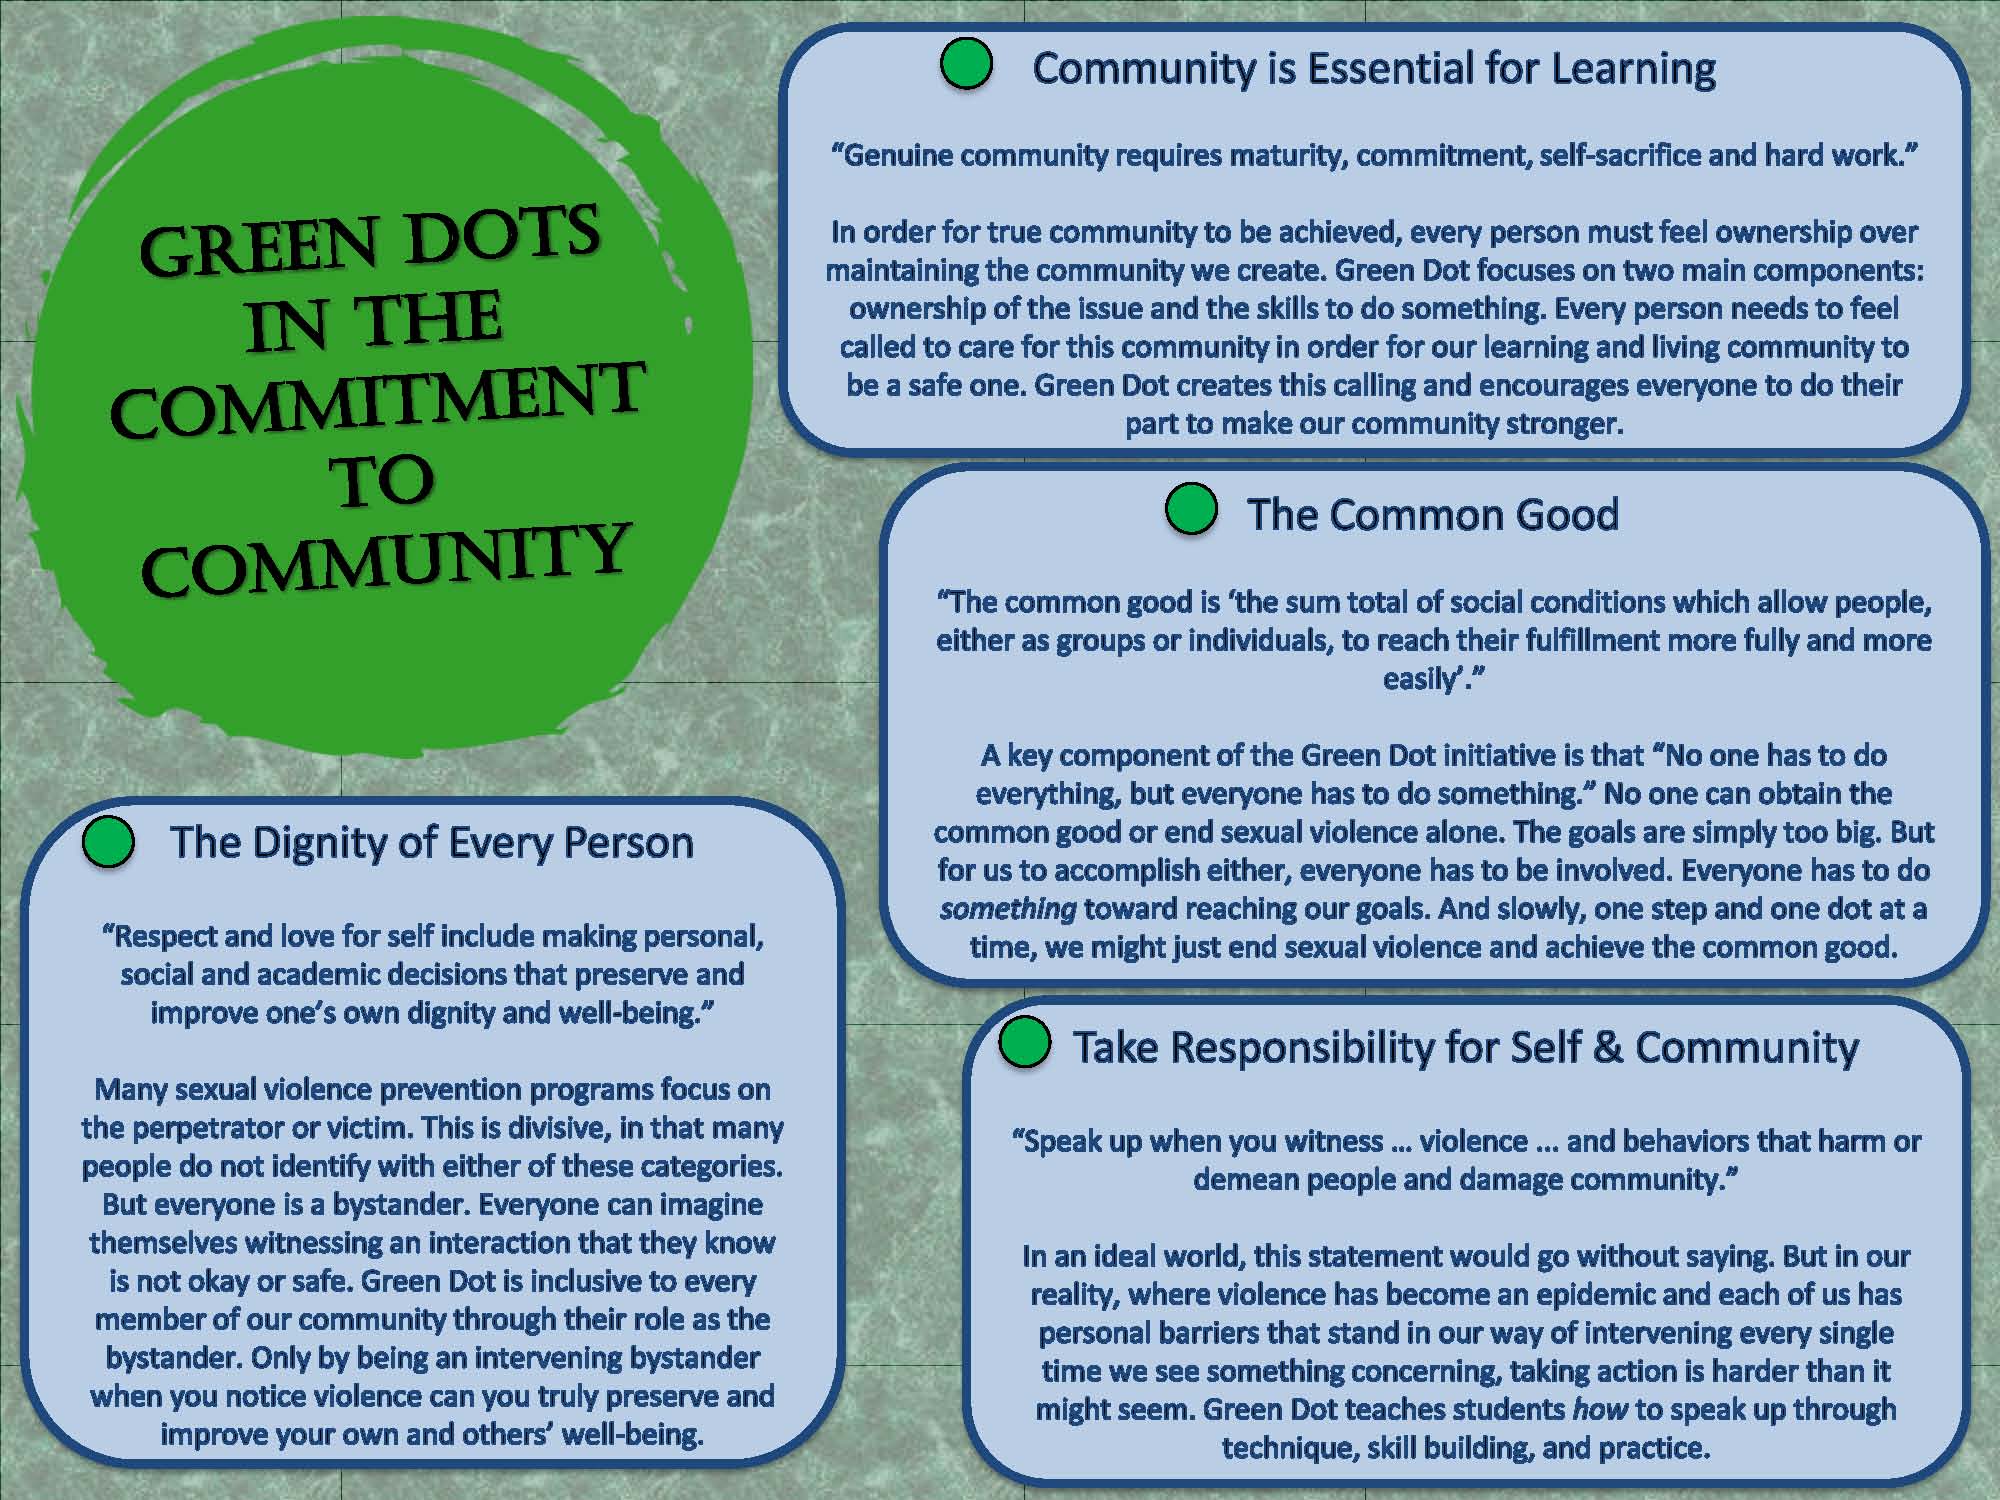 Green Dot and our Commitment to Community.